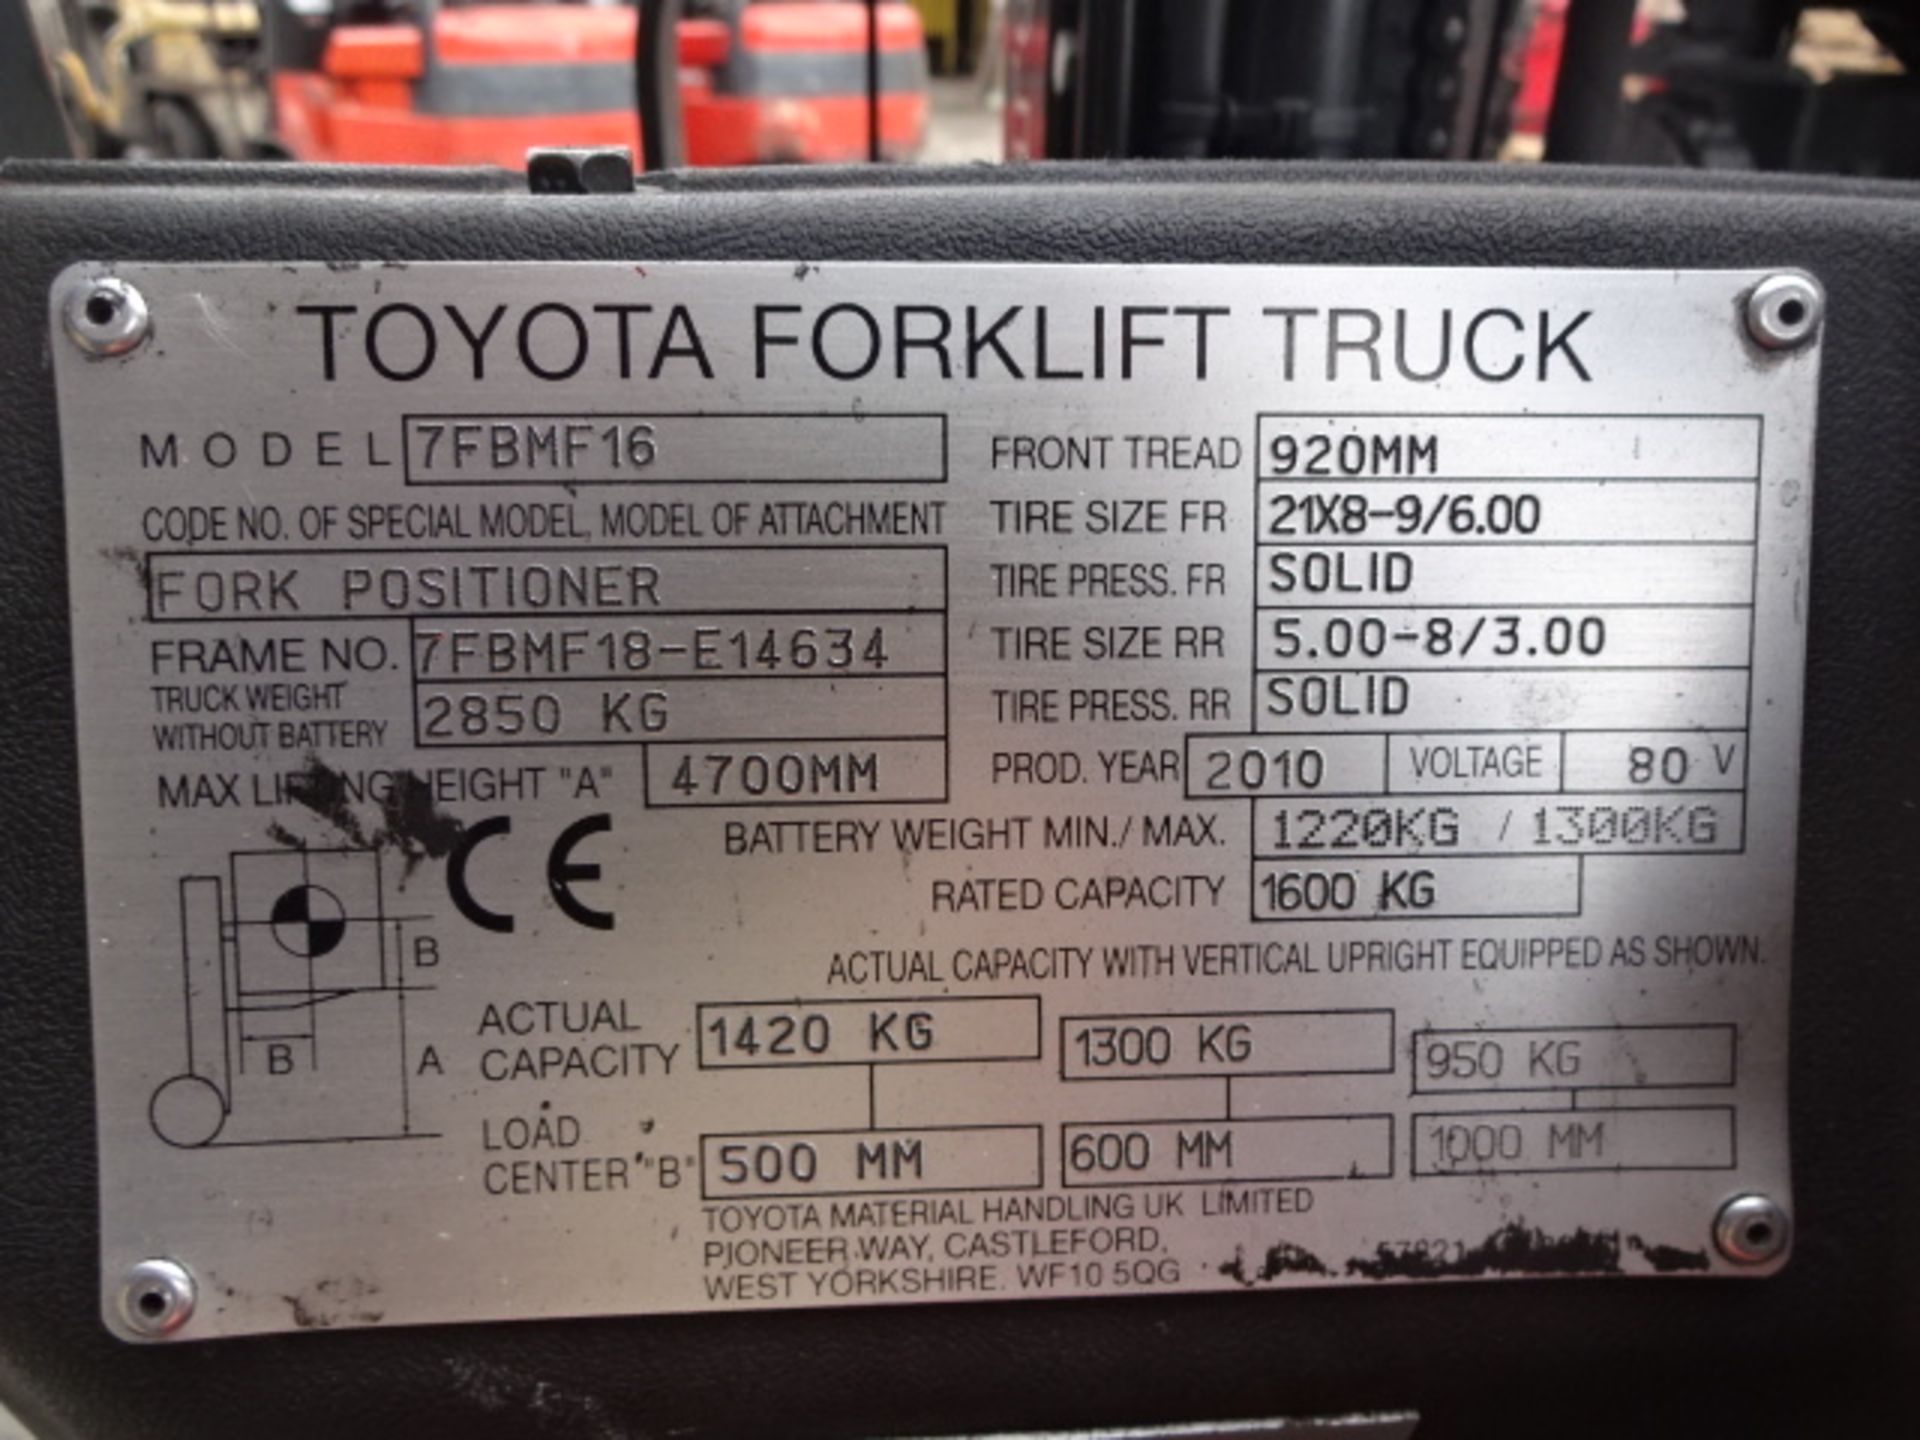 2010 TOYOTA 7-FBMF16 1.6t battery driven forklift truck S/n: E14634 with triplex free-lift, side- - Image 5 of 7